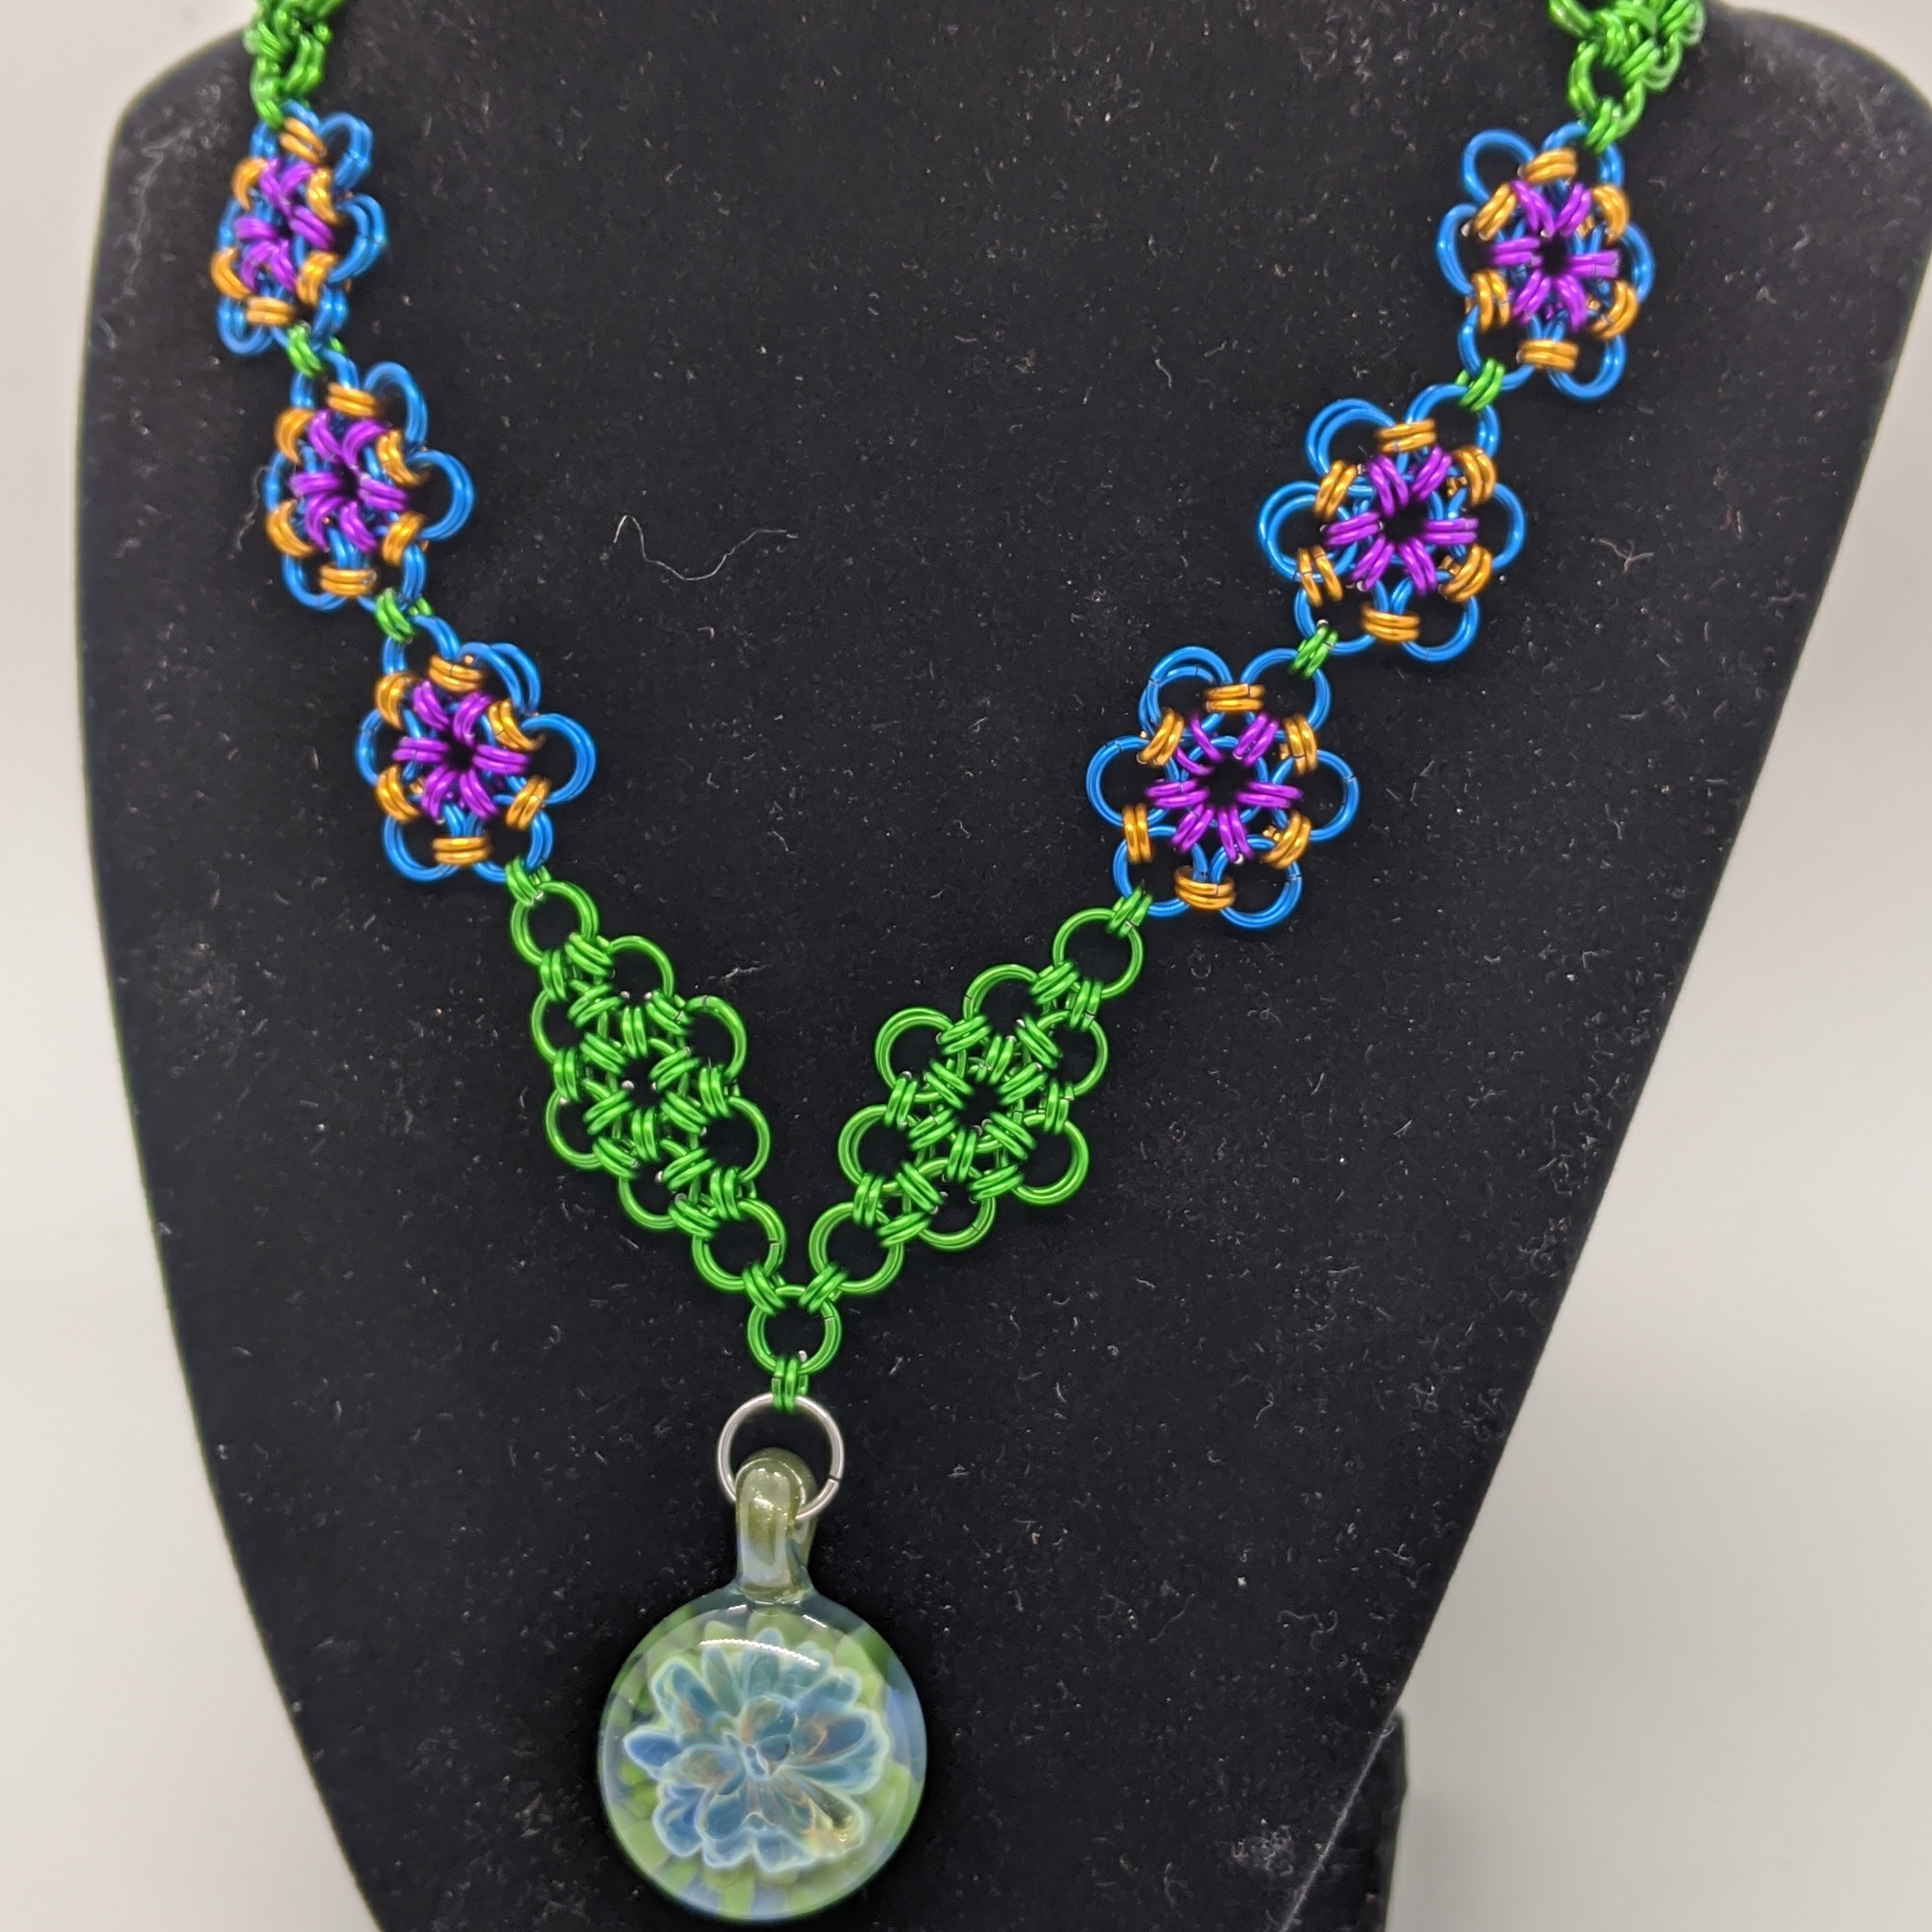 floral glass pendant on a chainmaille neckalace